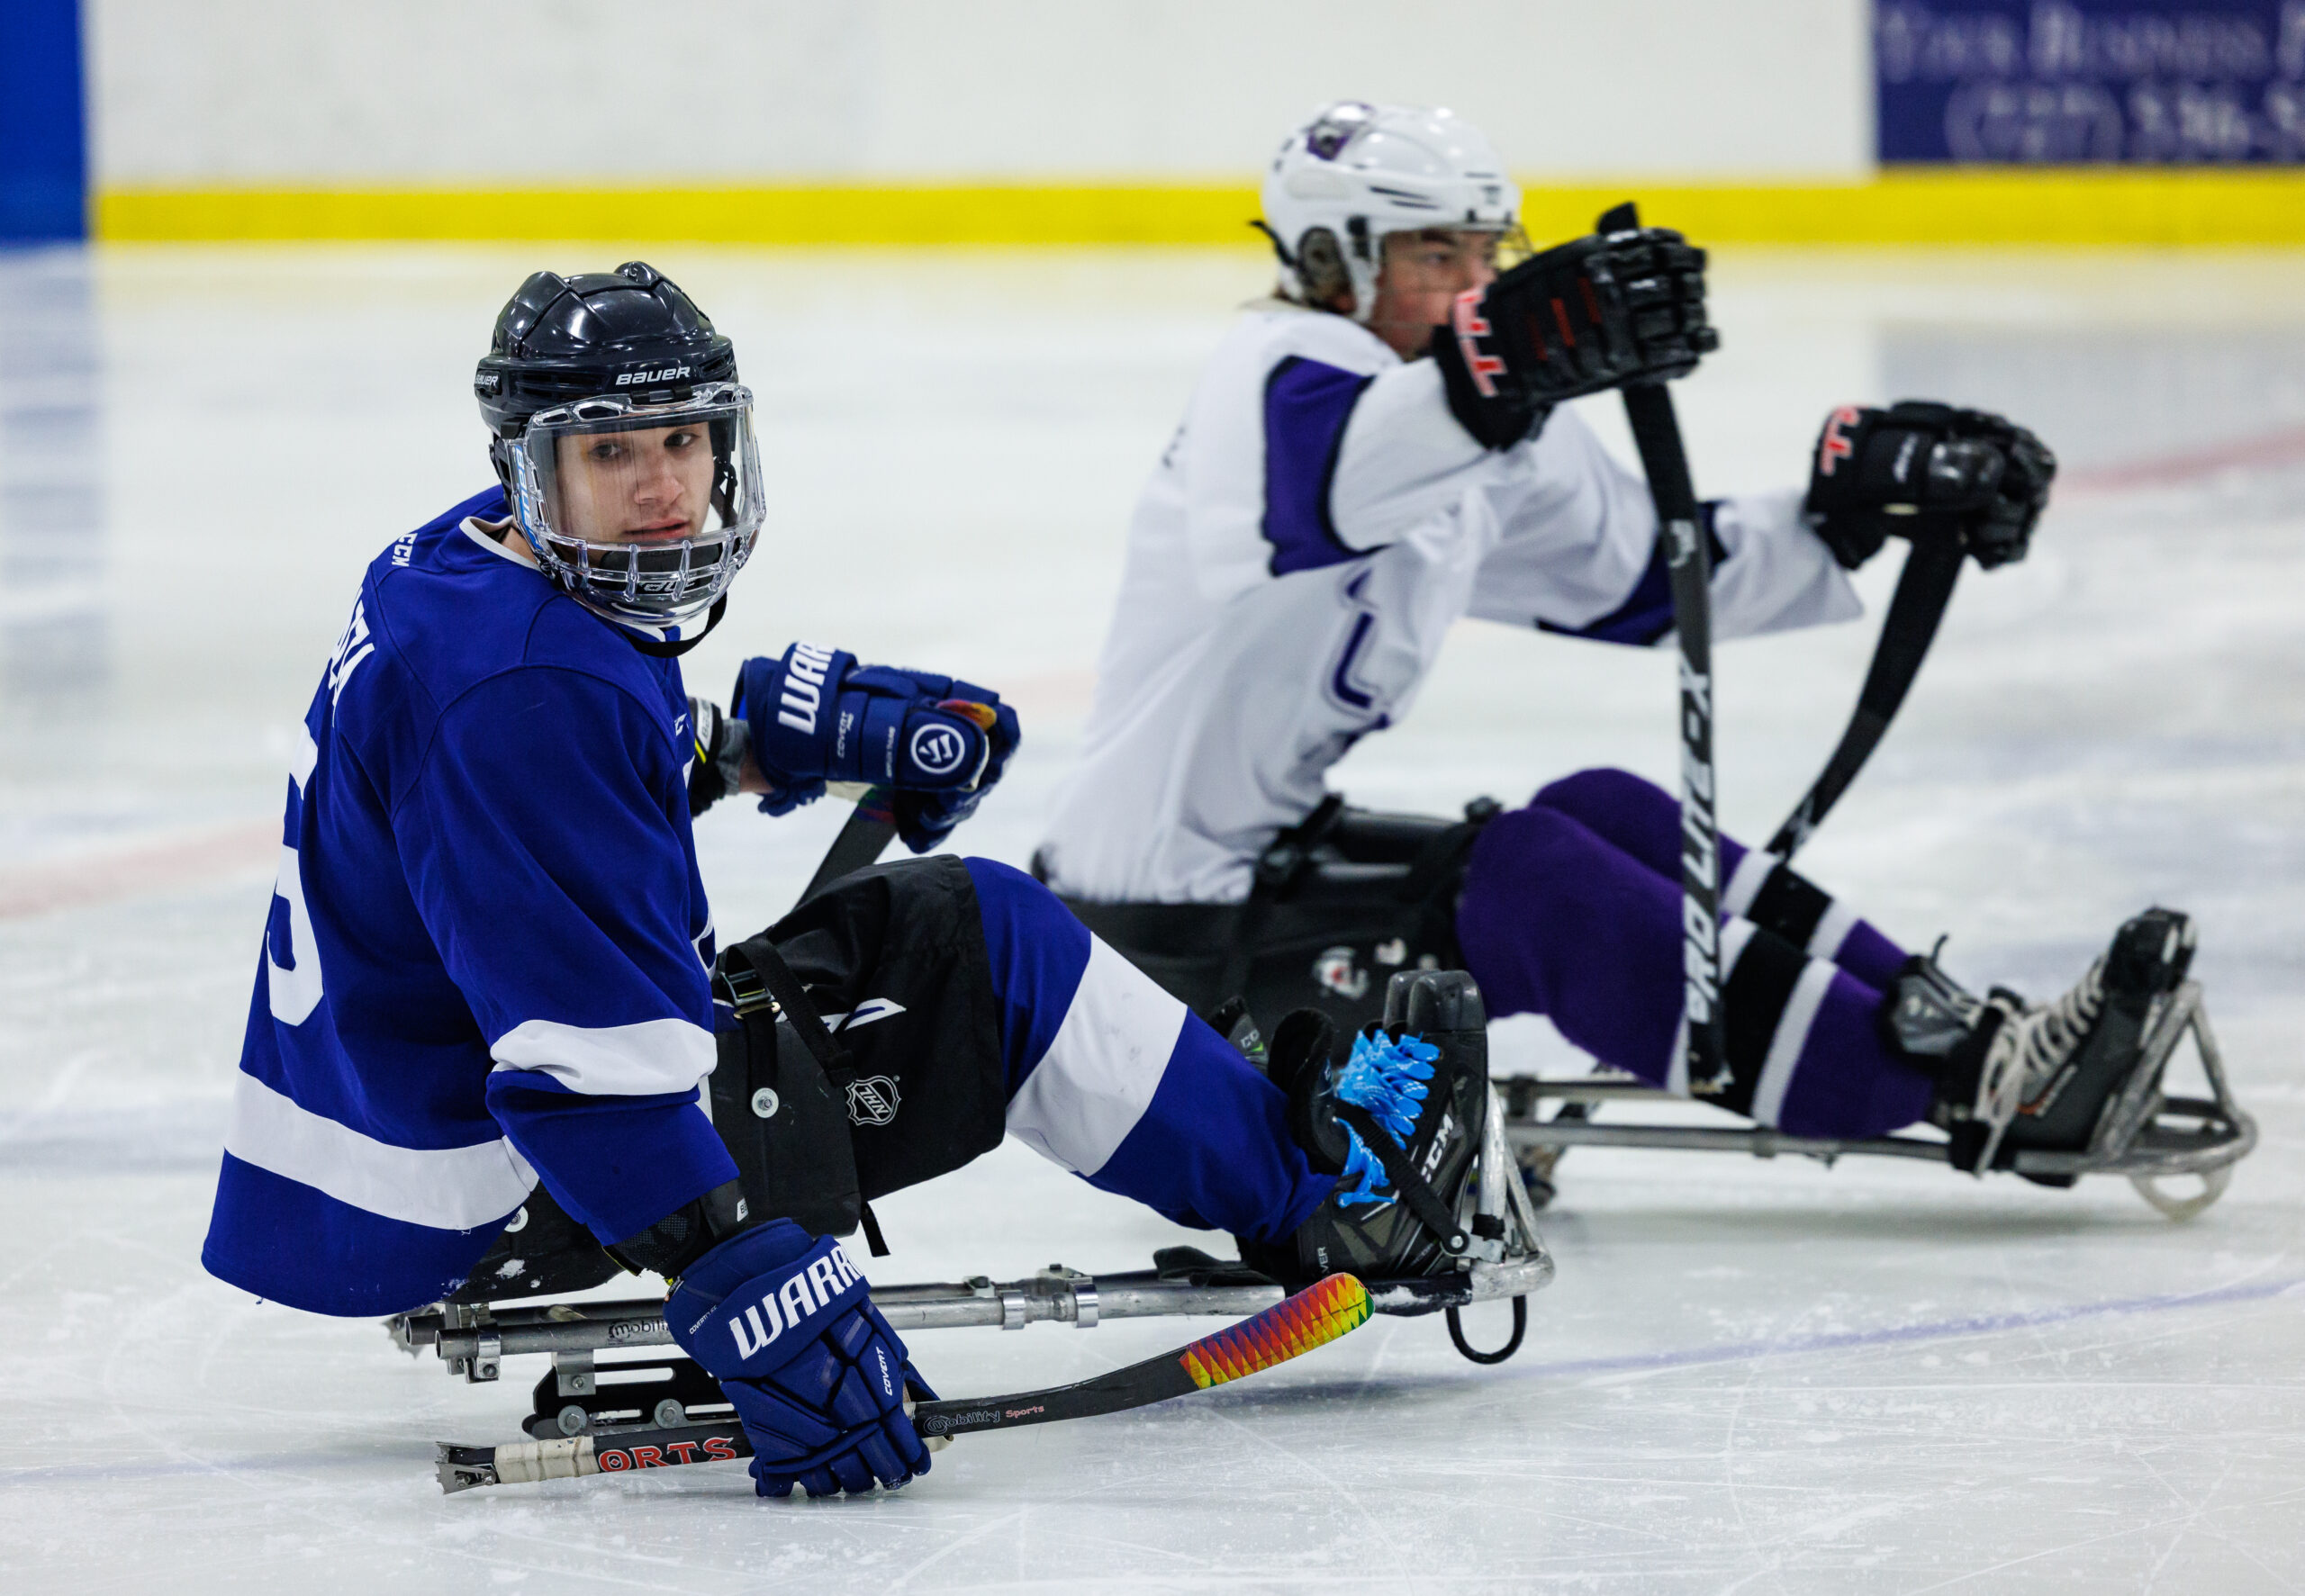 TAMPA, FL - MARCH 4: The Tampa Bay Lightning sled hockey team plays the Space Coast Blast on March 4, 2023 at Clearwater Ice Arena in Clearwater, Florida.  (Photo by Casey Brooke Lawson/Tampa Bay Lightning)